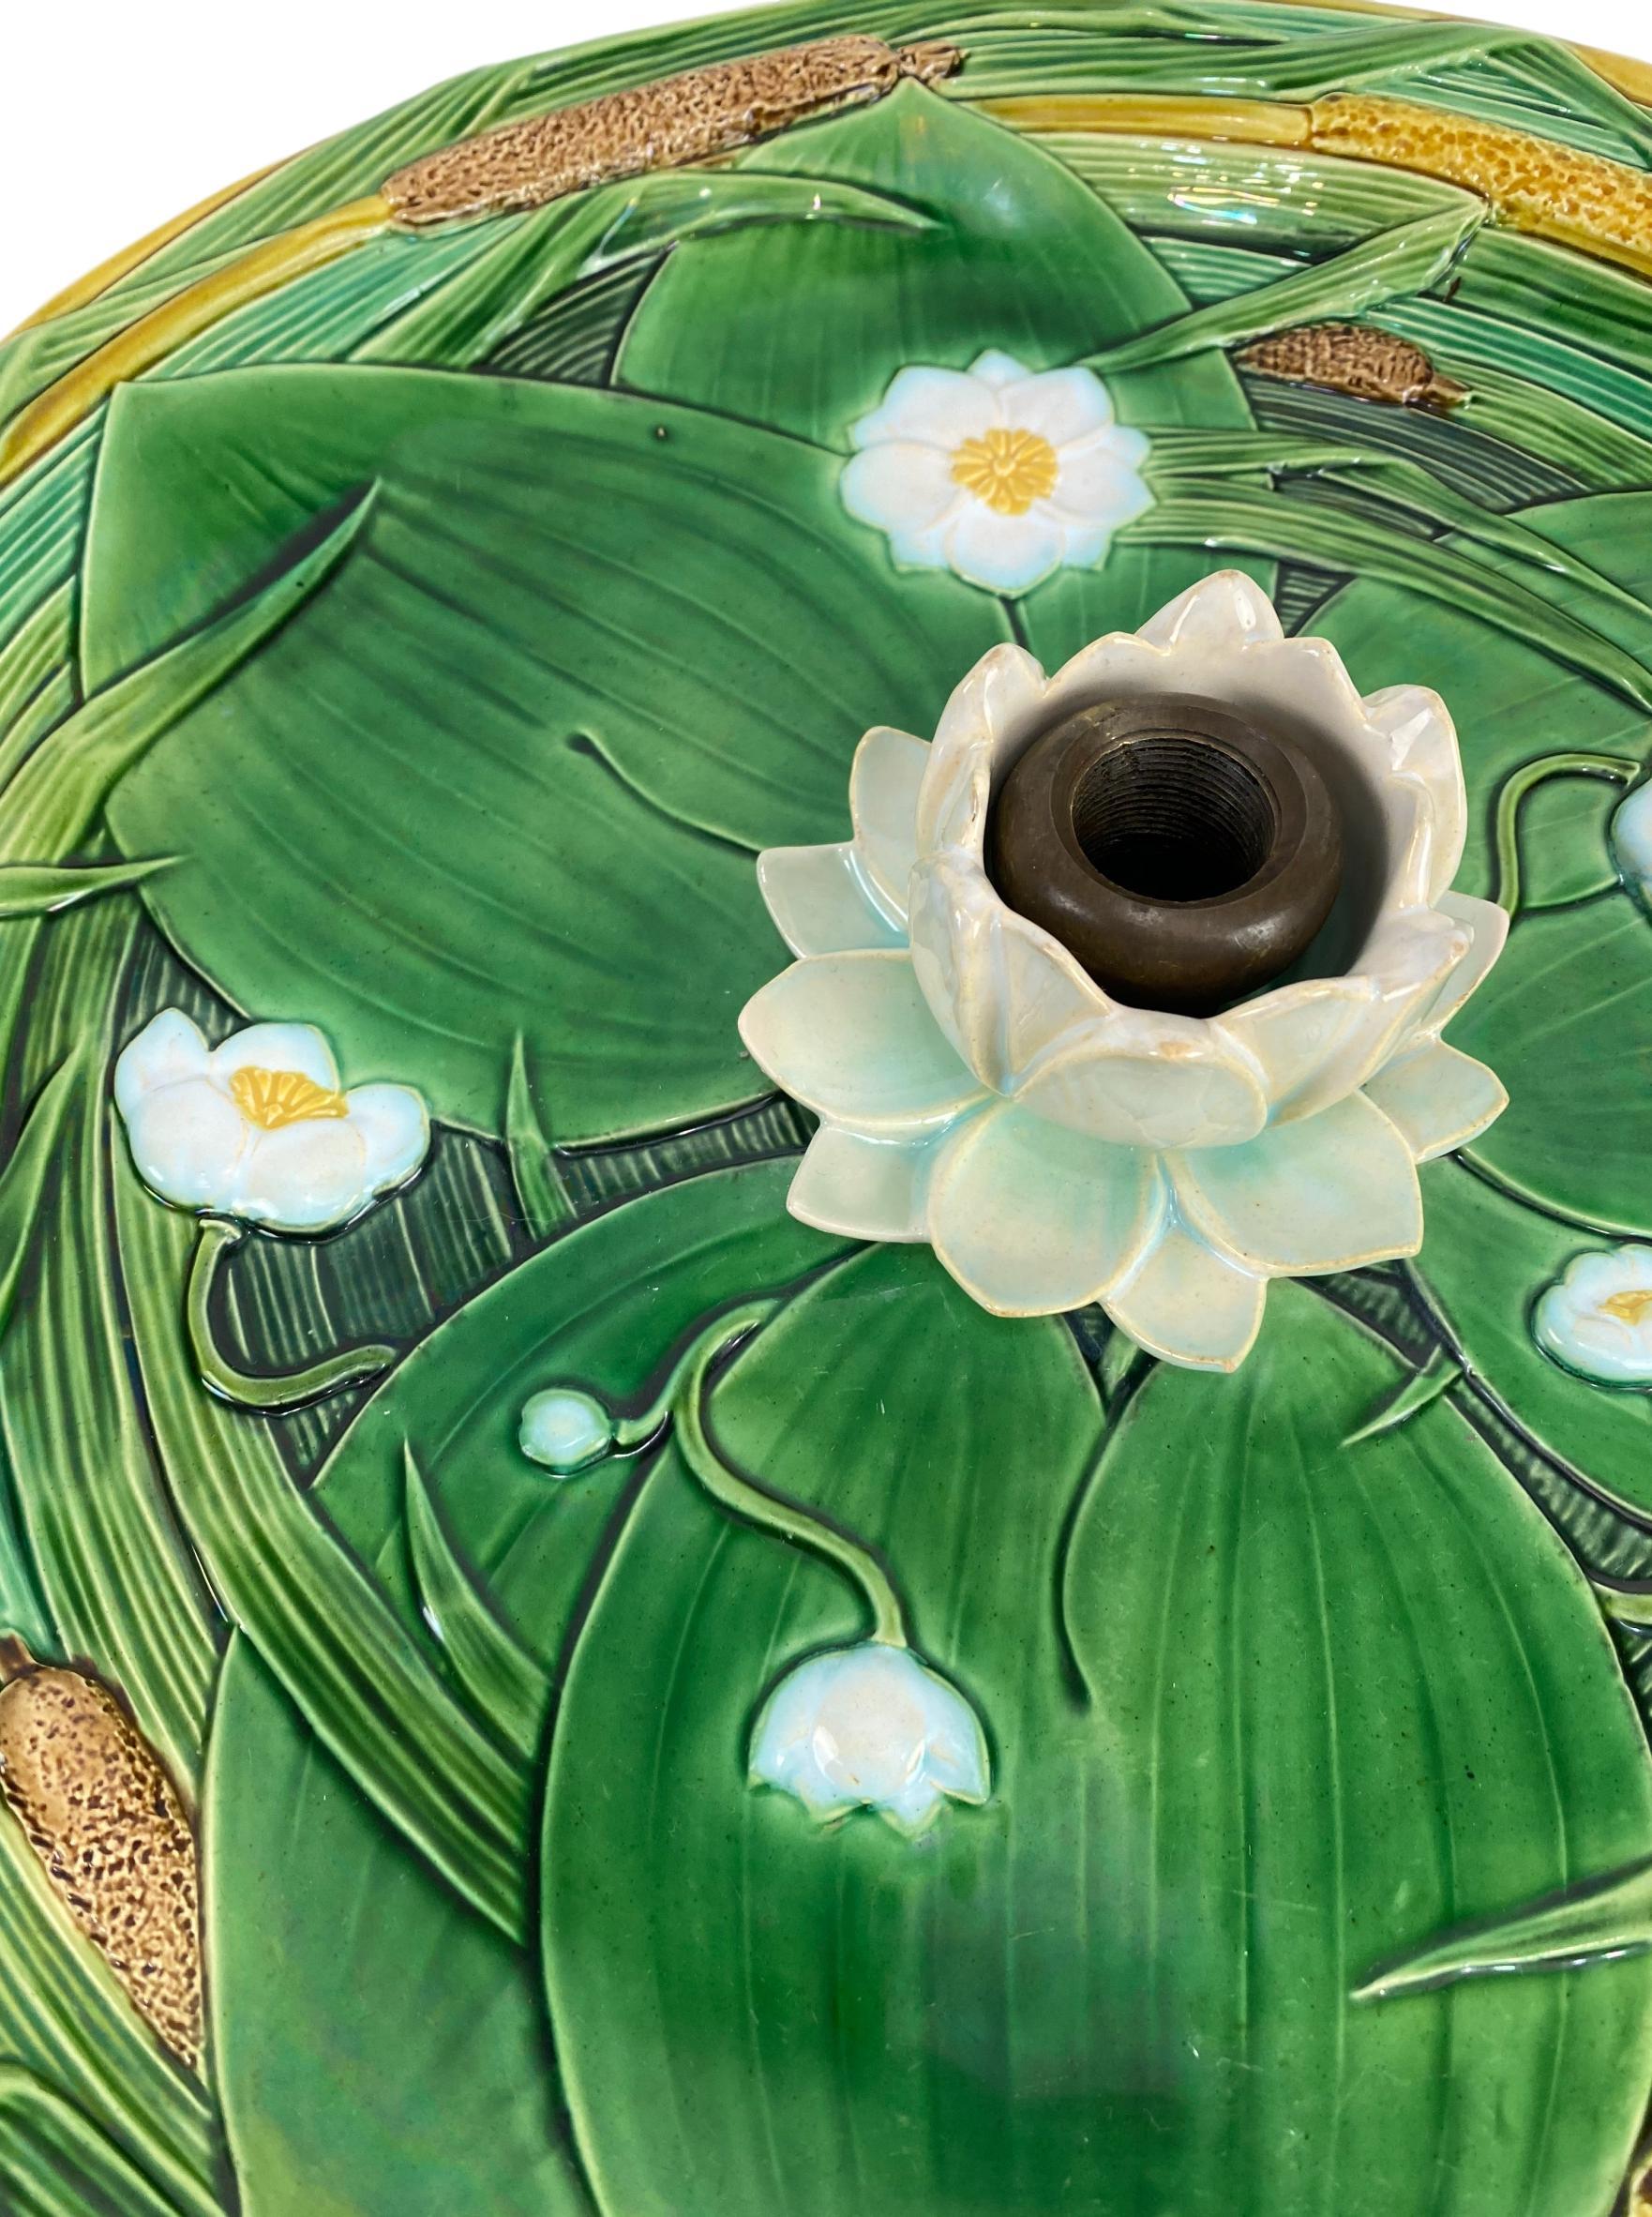 English Minton Majolica Centerpiece Tray 15-in, Lotus Flower on Green Ground, Dated 1863 For Sale